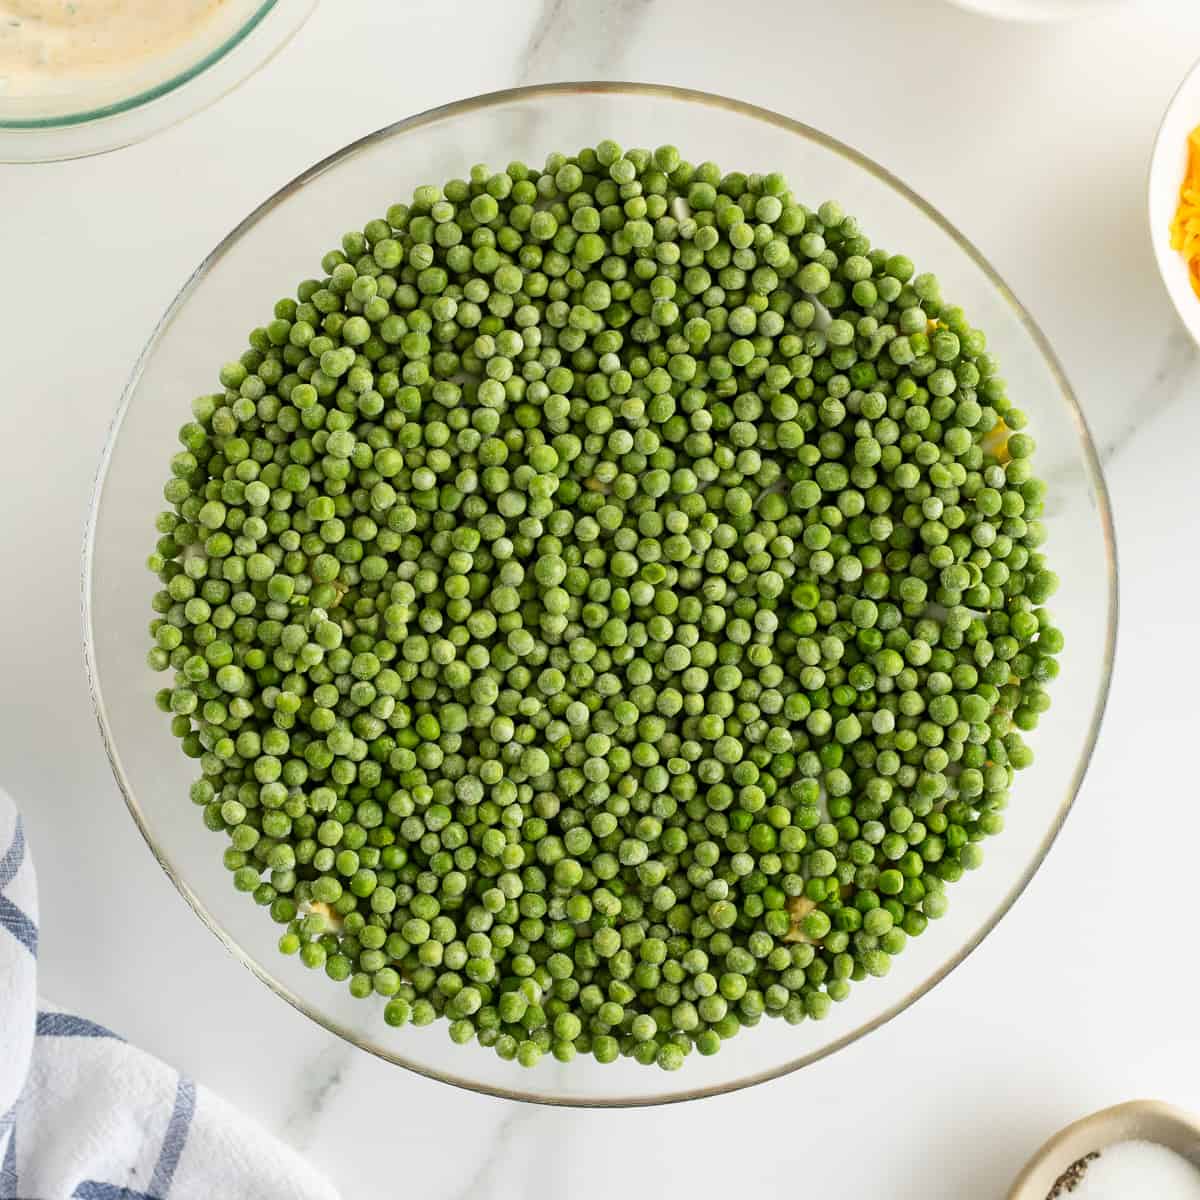 A layer of frozen peas in a glass bowl.